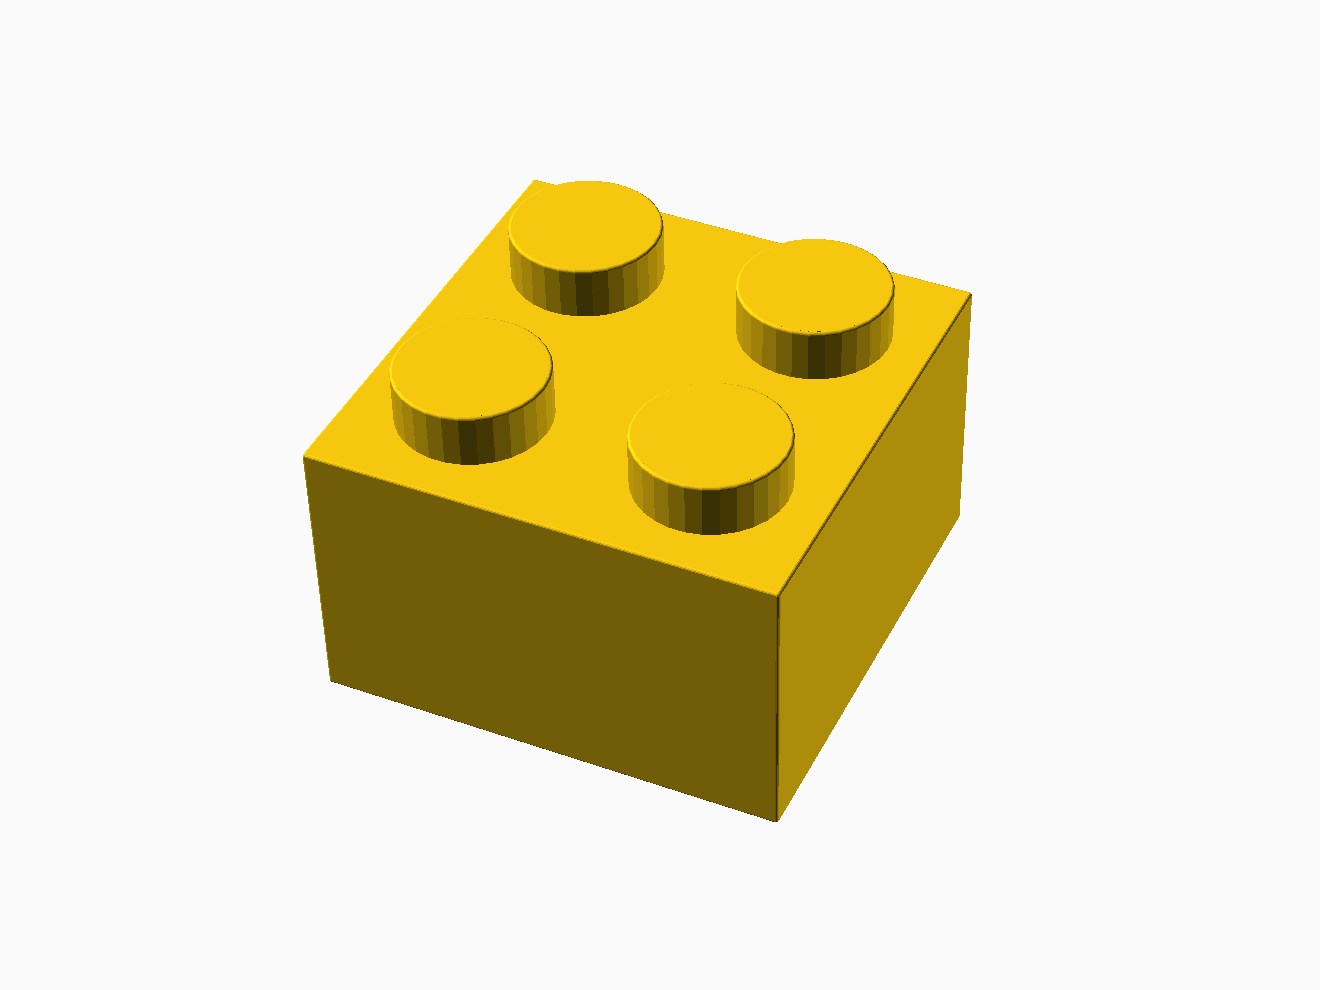 3D printable model of a LEGO 2x2 Brick with standard knobs.